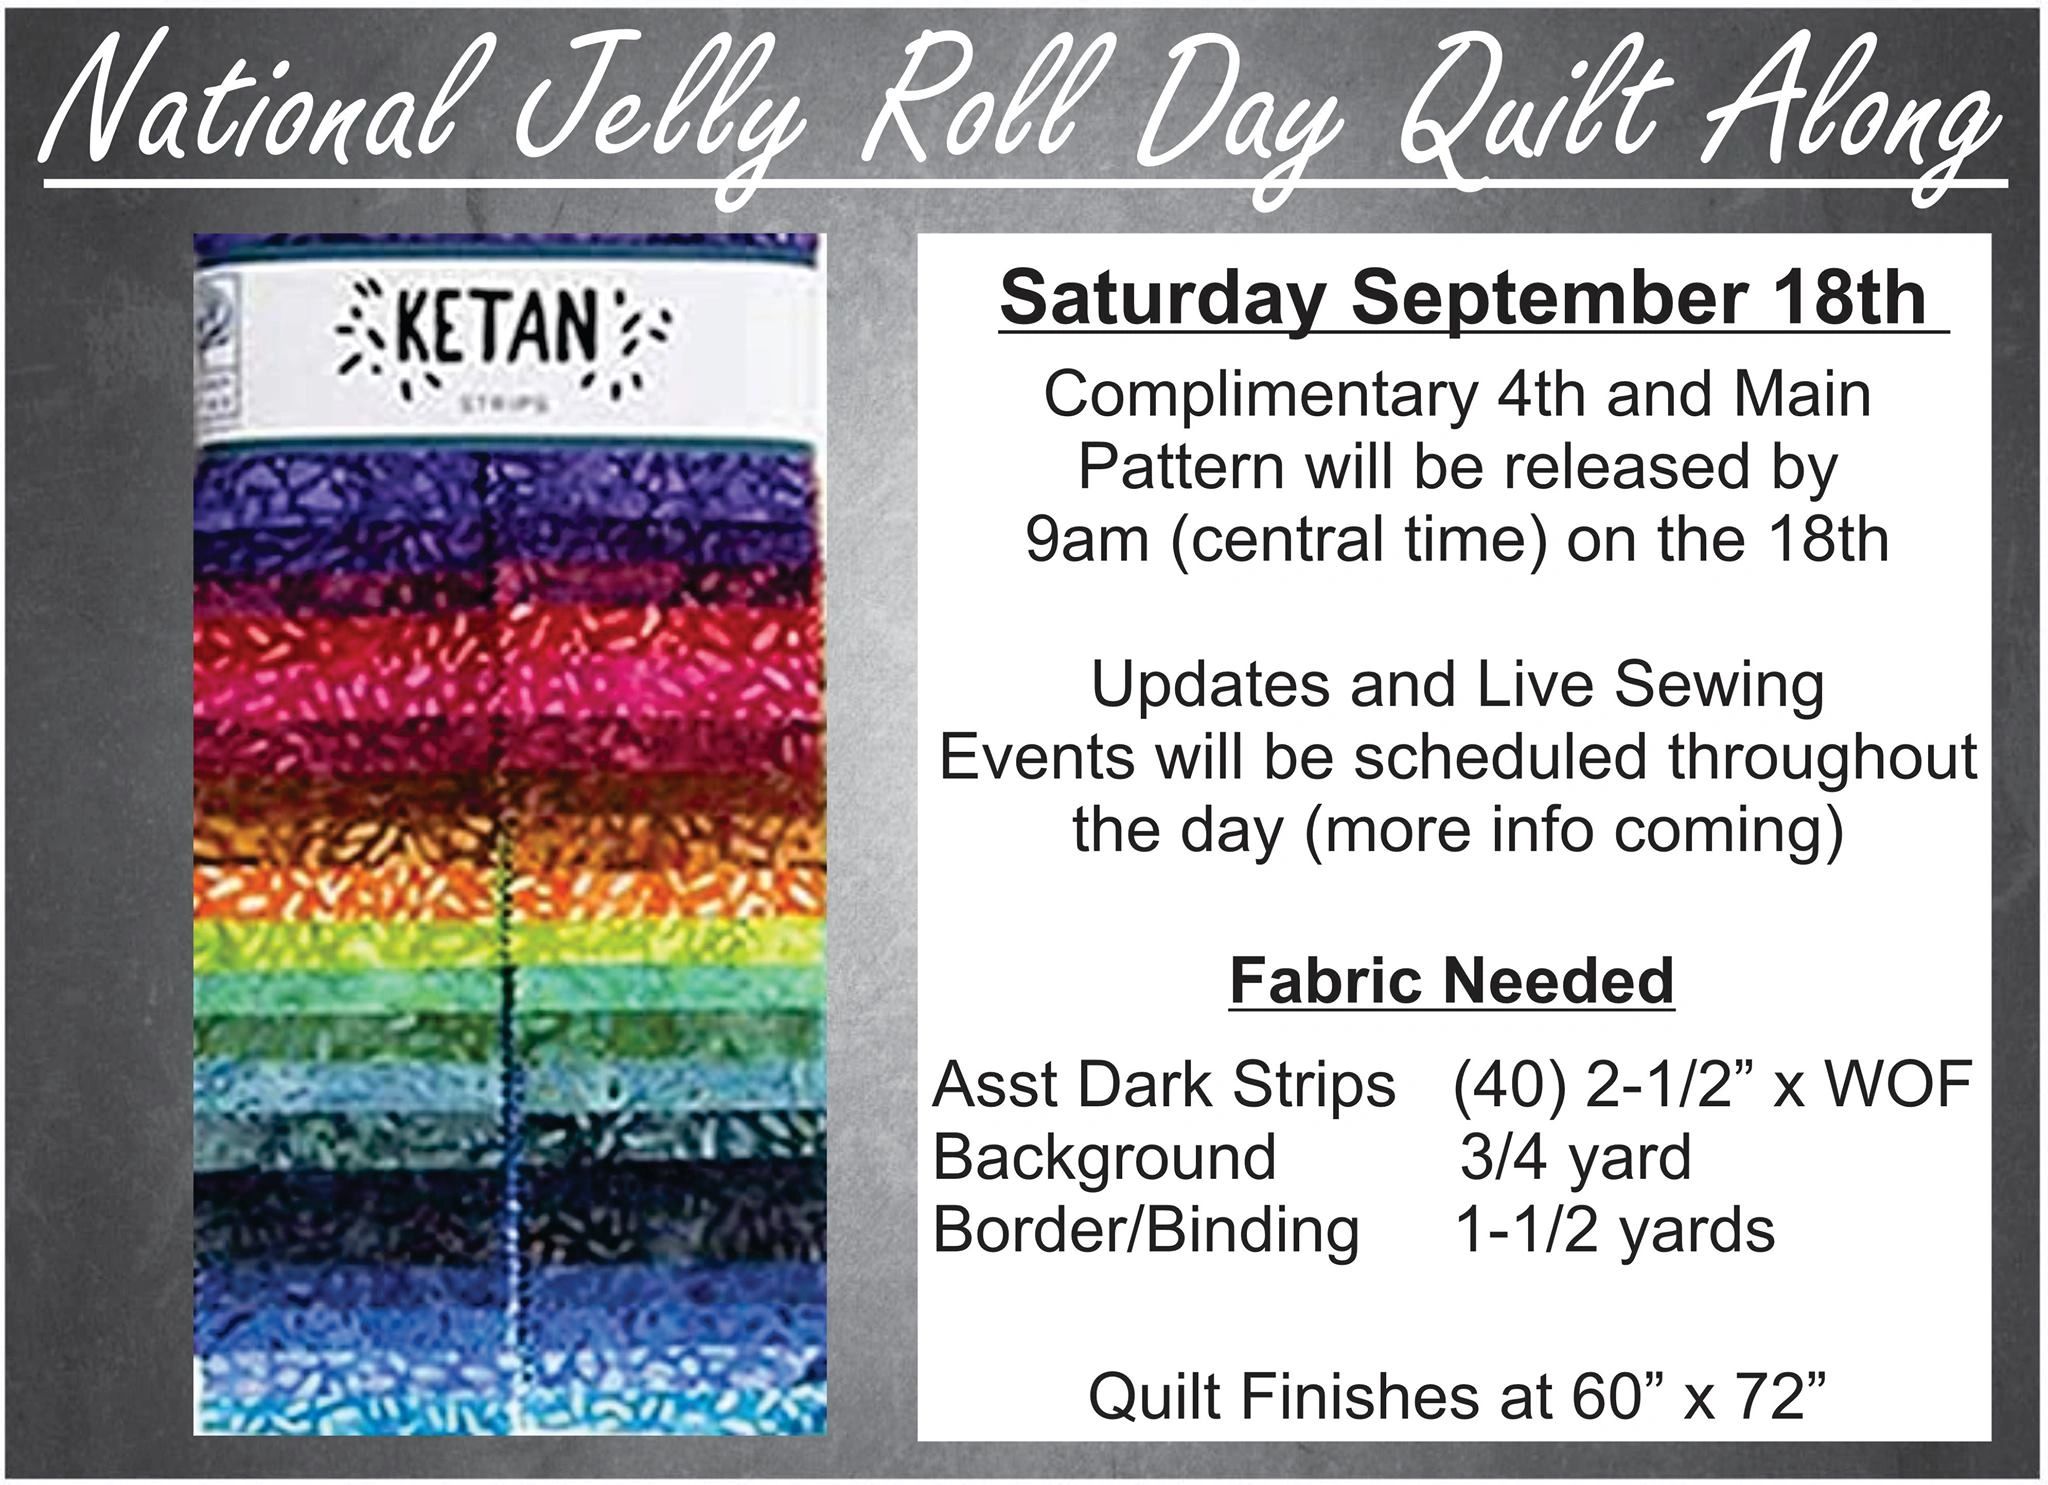 National Jelly Roll Day Cutting Instructions